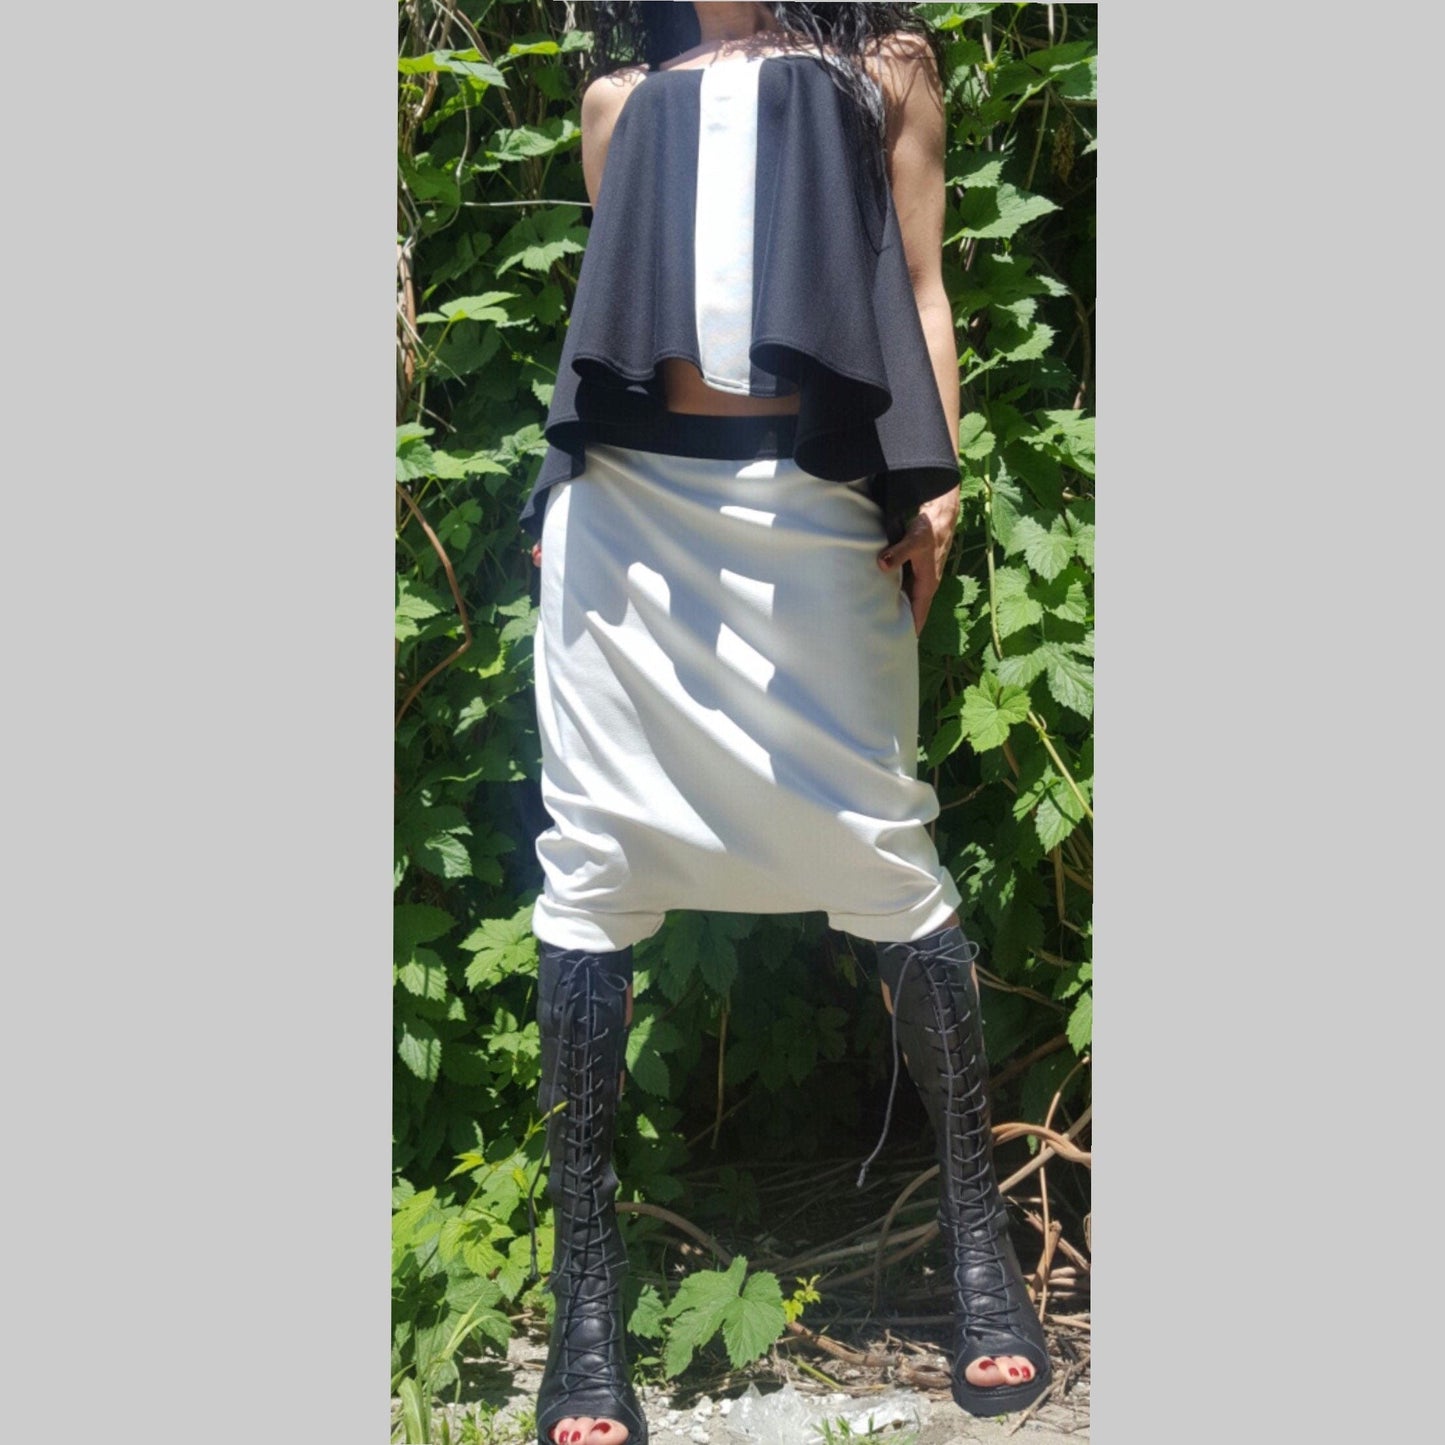 Two Piece Urban Outfit - Handmade clothing from AngelBySilvia - Top Designer Brands 